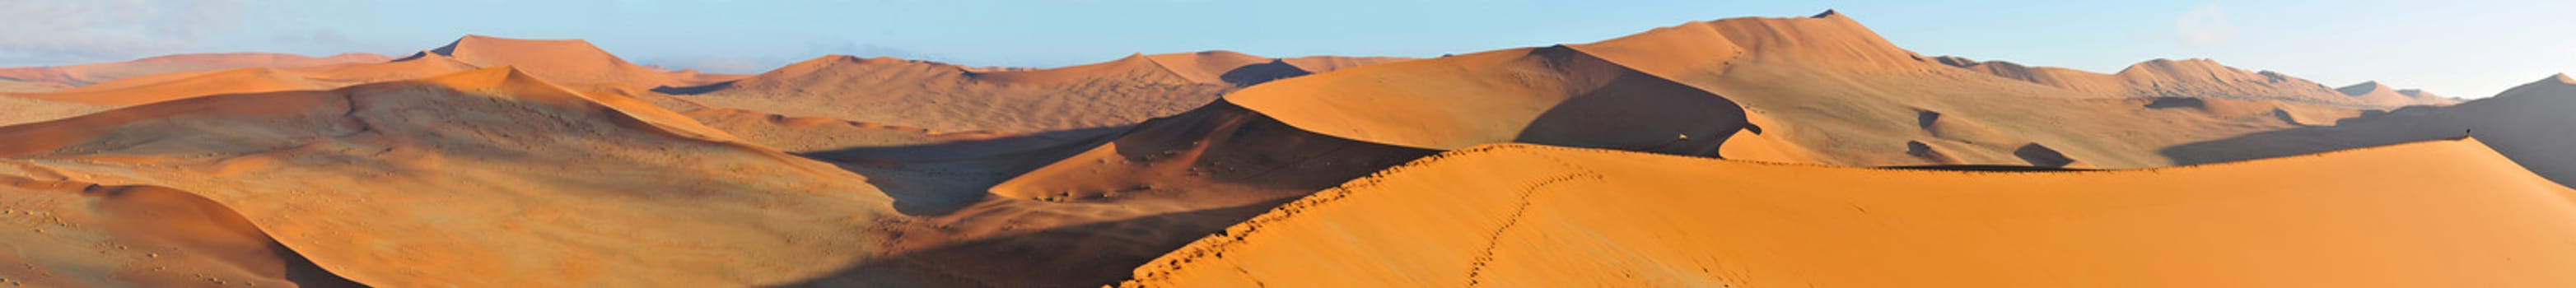 Panorama from seven photos of the dune  landscape north of Sossusvlei
